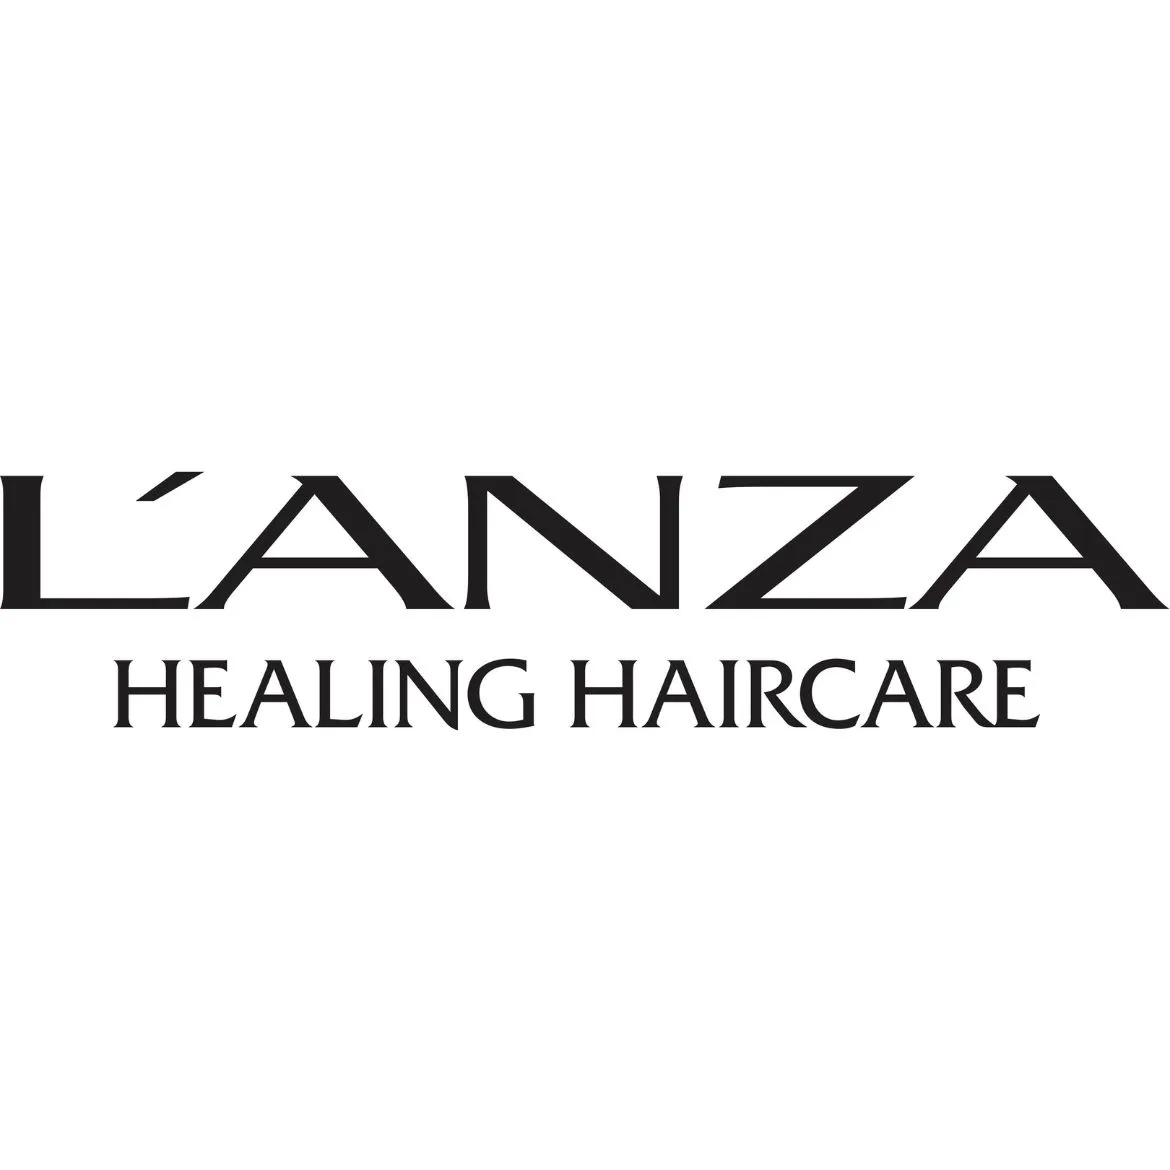 Lanza Hair Products